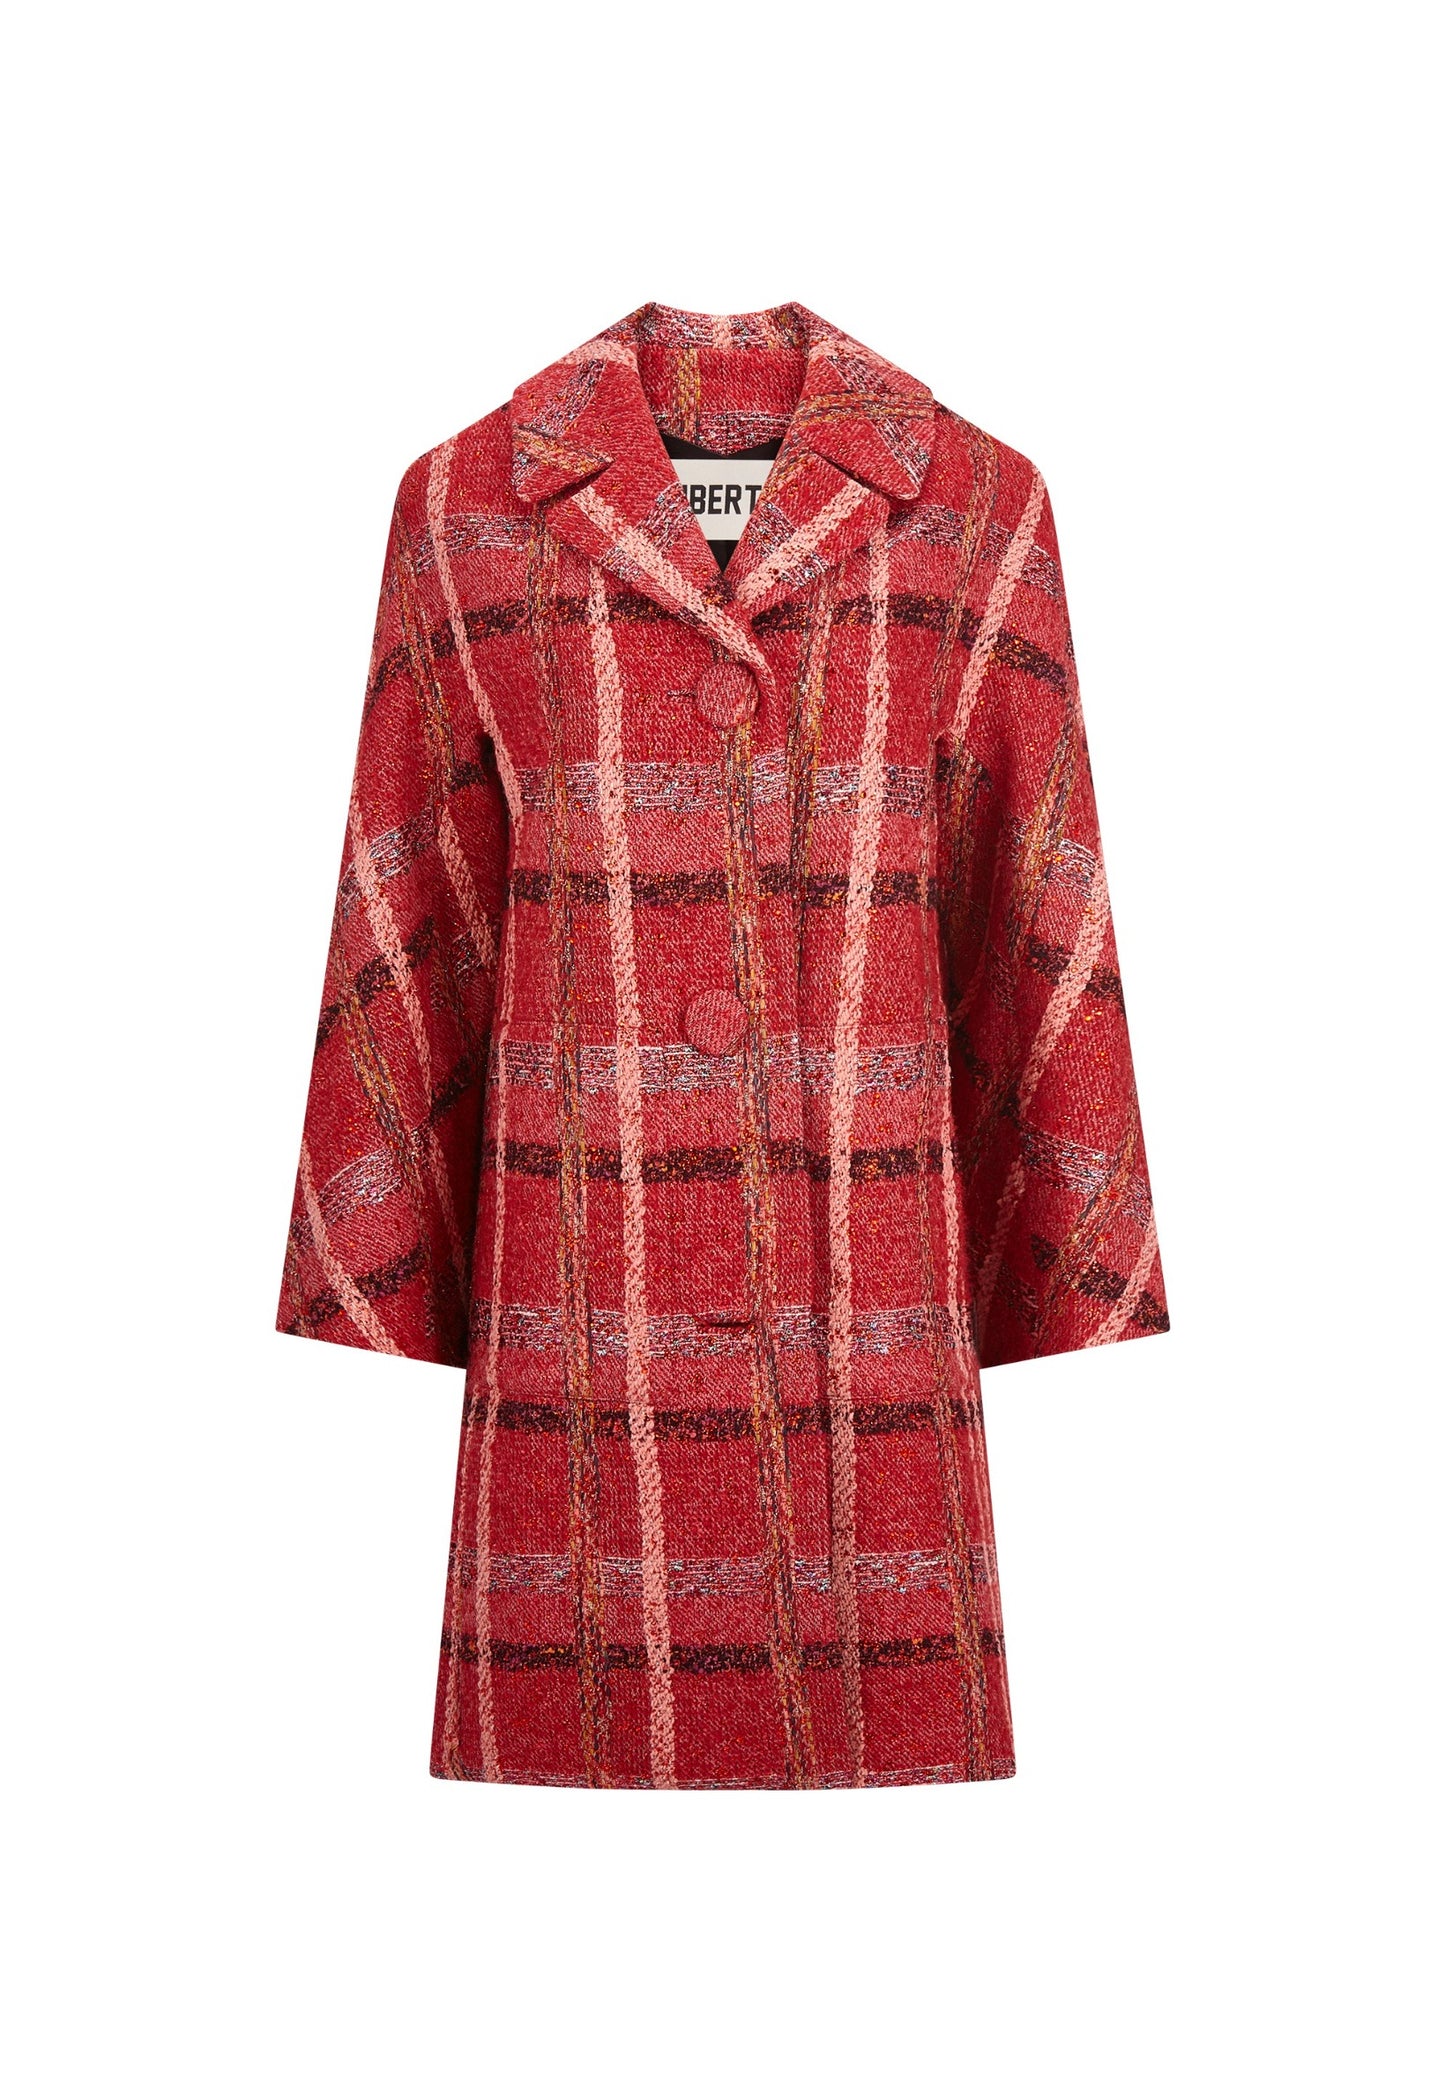 'RED BOUCLE HEAVY STARDUST' L/S PATCH POCKET COAT W/ CRYSTALS -  - Libertine